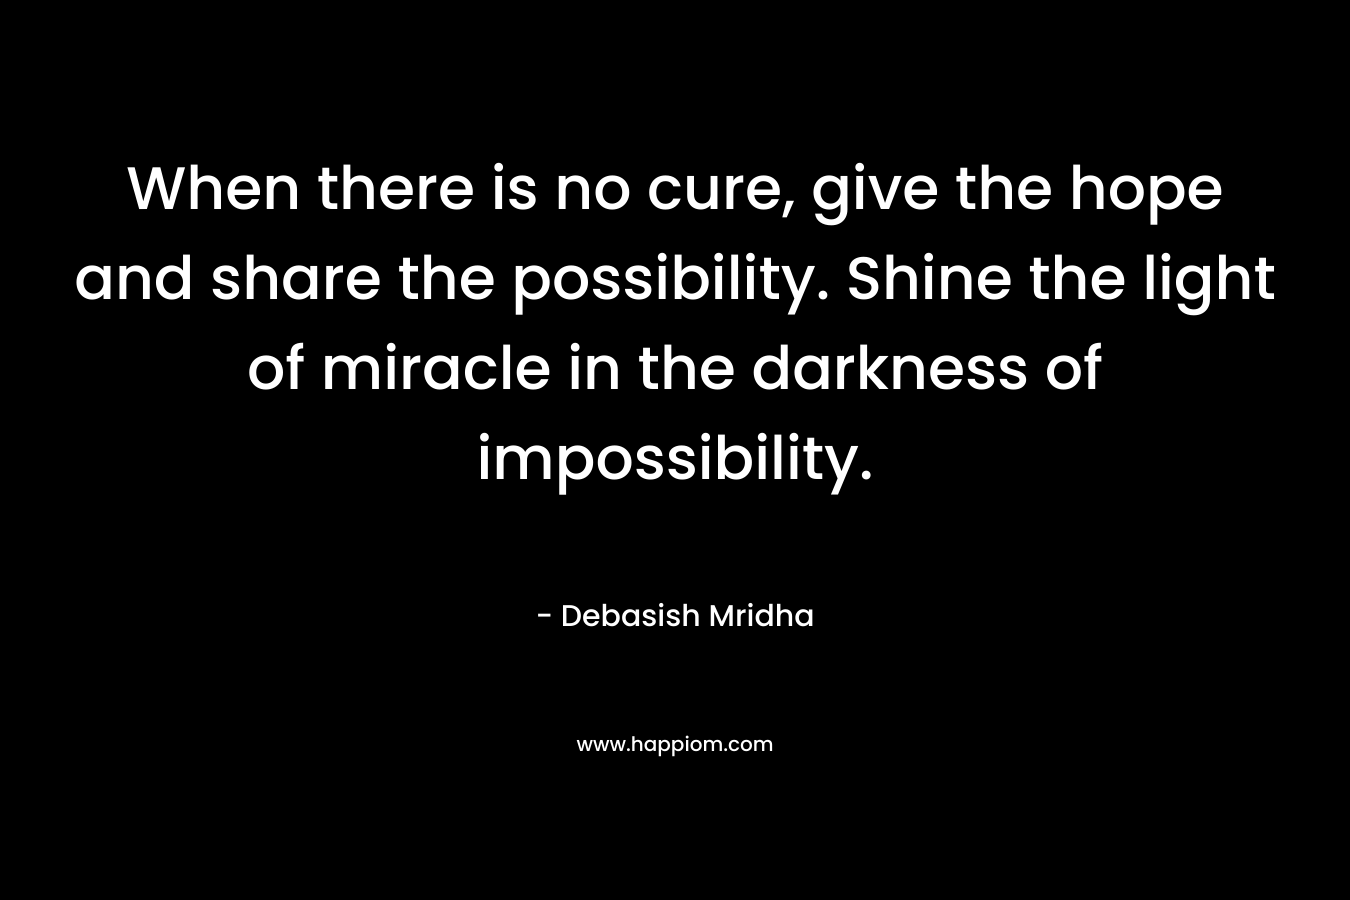 When there is no cure, give the hope and share the possibility. Shine the light of miracle in the darkness of impossibility.